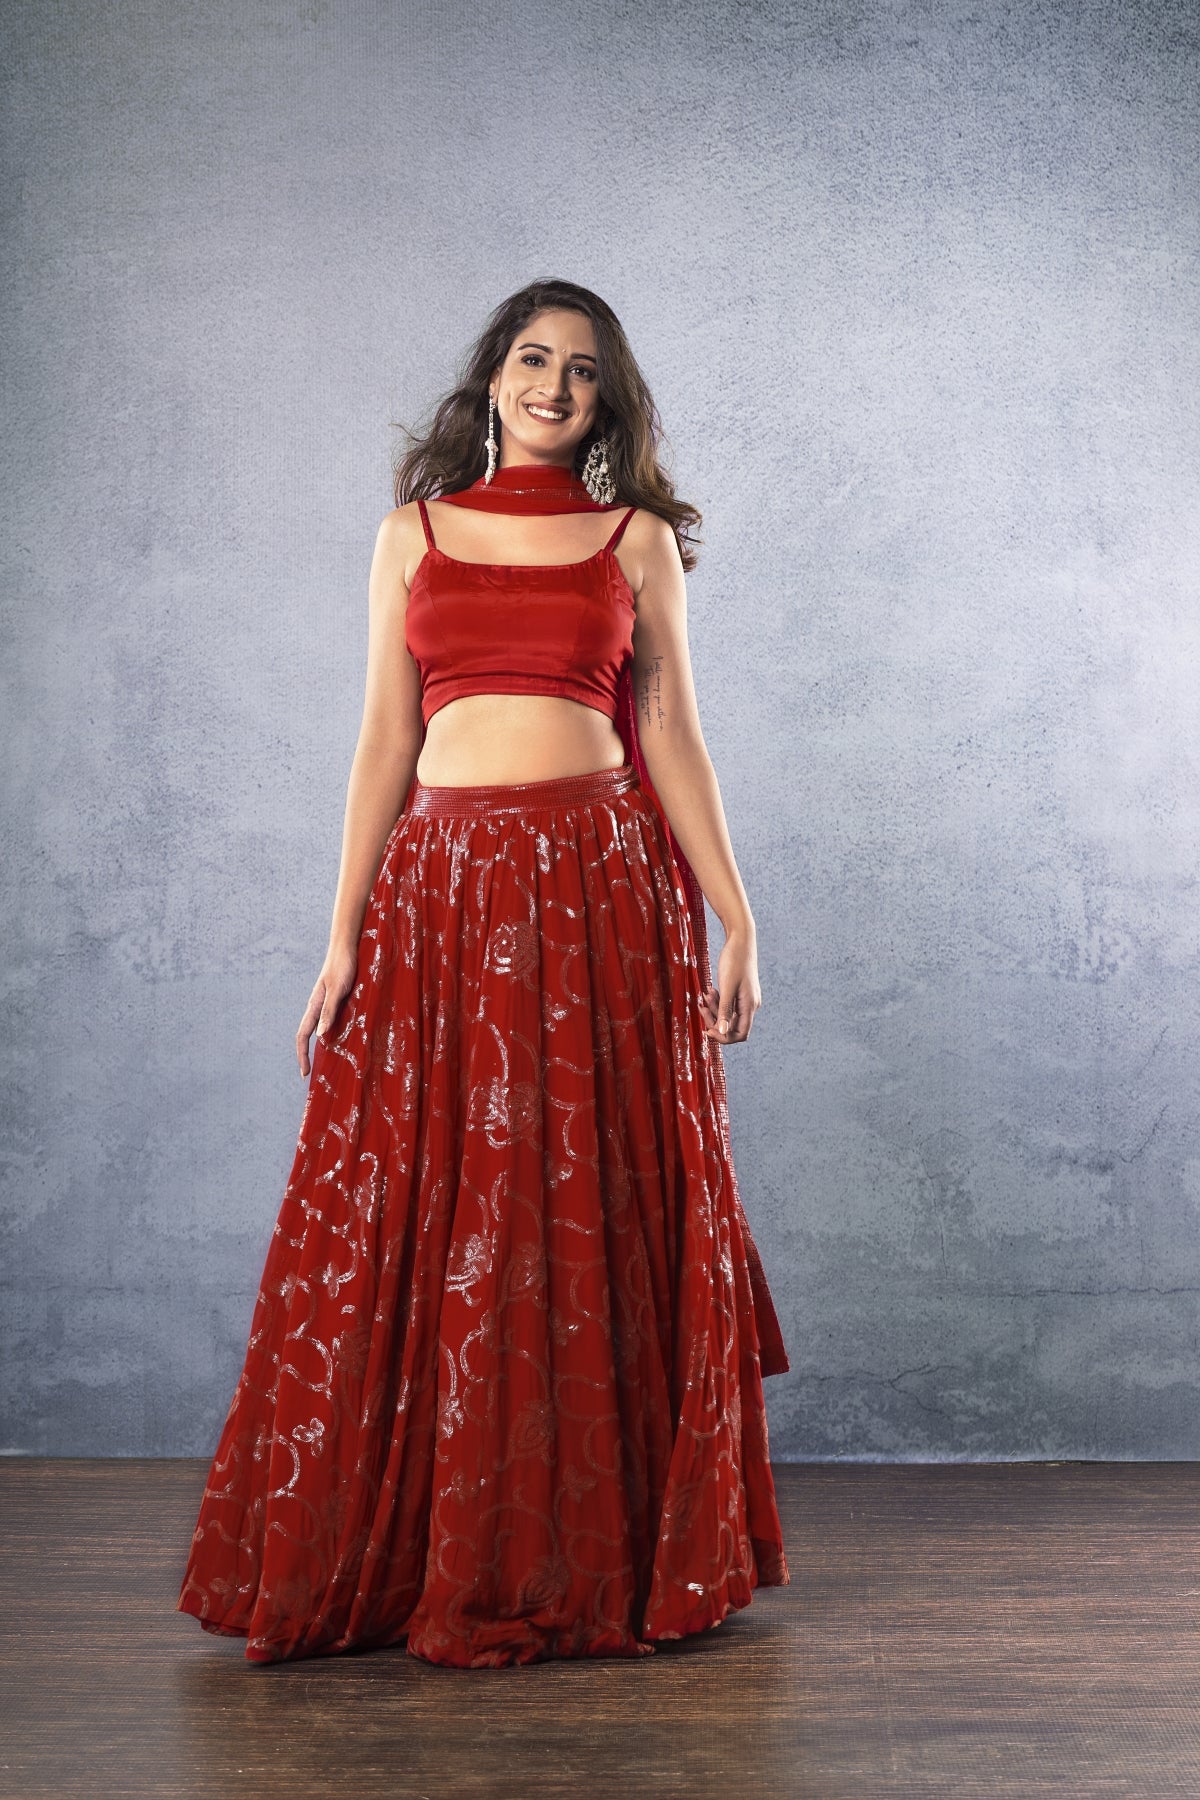 Merlot Lehenga | Red Sequined Modern Bridal Outfit | Panache by Sharmeen